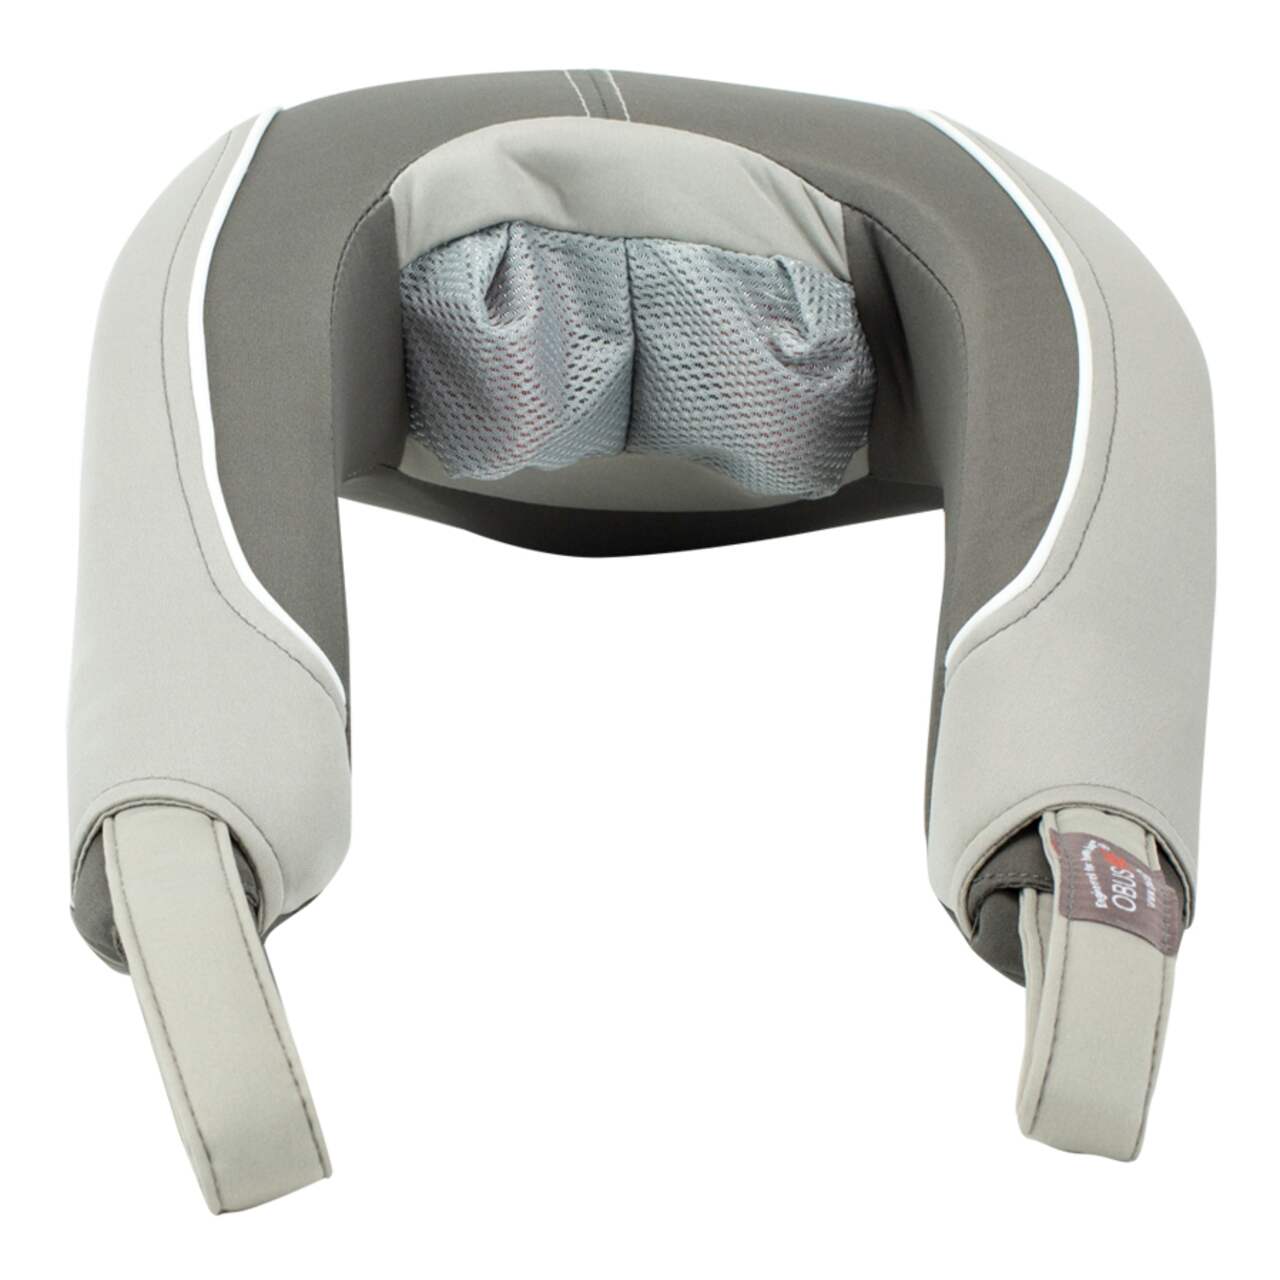 https://media-www.canadiantire.ca/product/living/personal-garment-care/personal-care/0745691/obusforme-shiatsu-neck-massager-adc93c26-c6df-4ce7-a650-ea7f53076a16.png?imdensity=1&imwidth=640&impolicy=mZoom